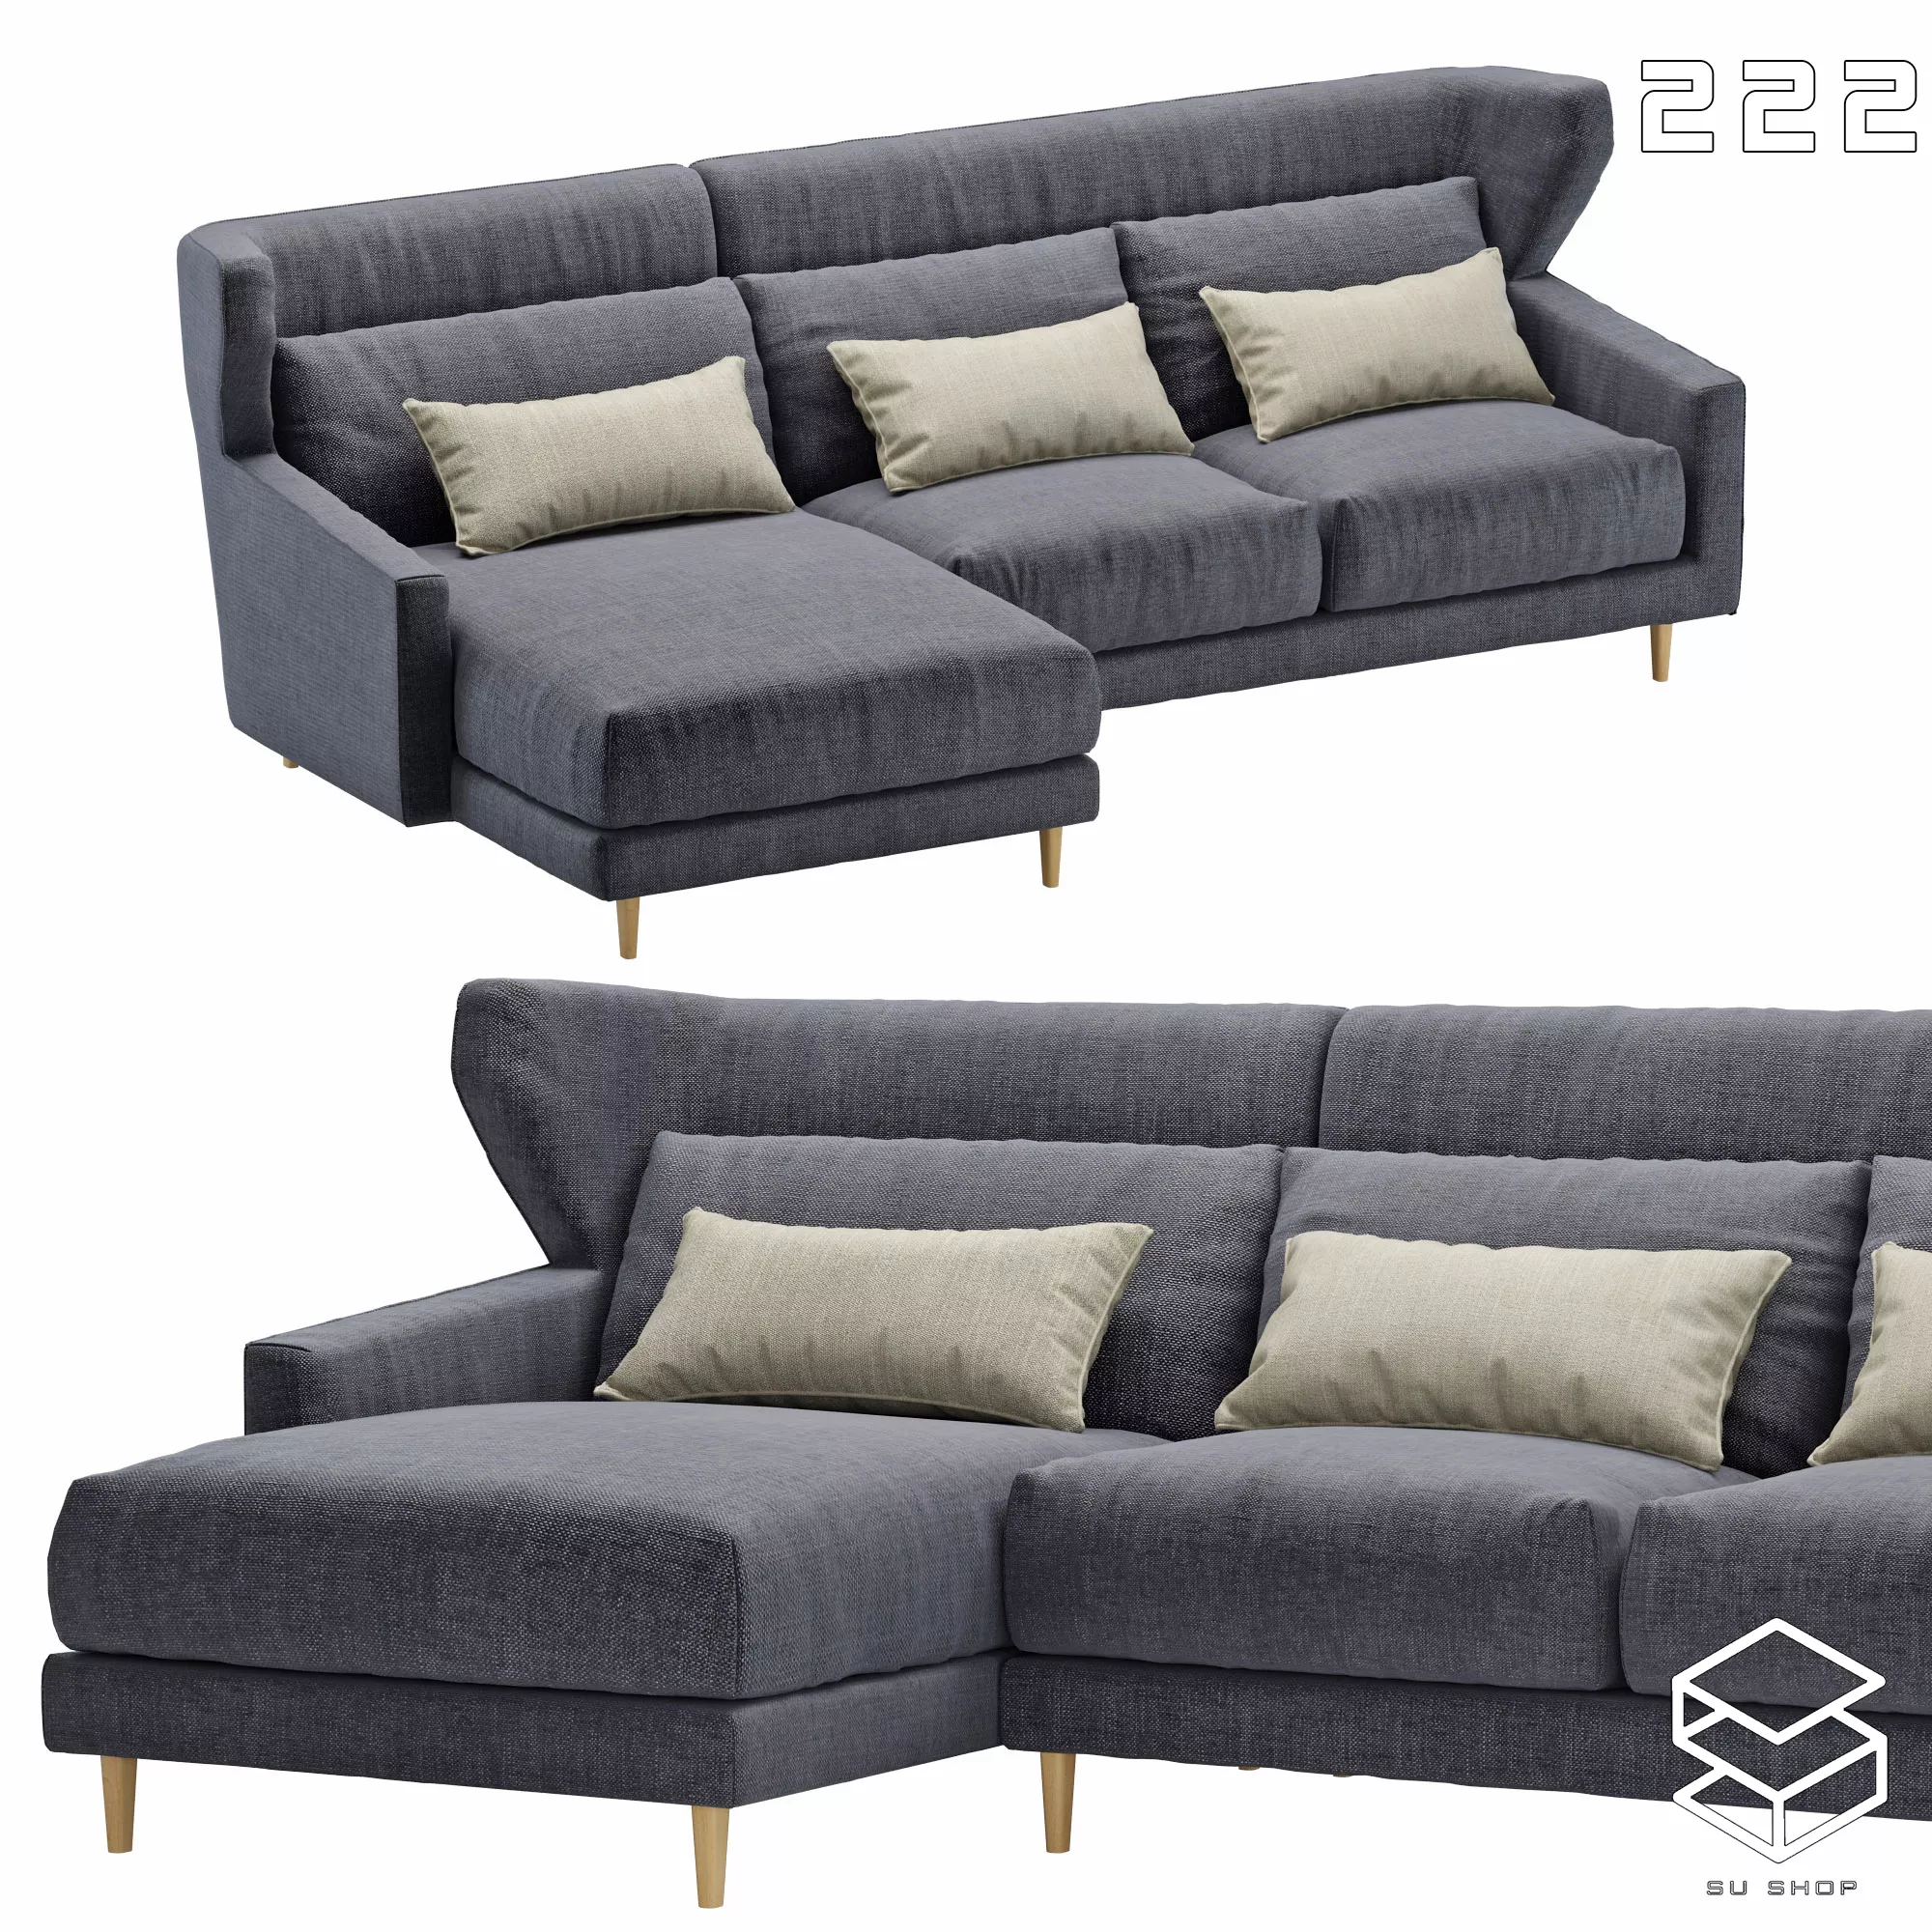 MODERN SOFA - SKETCHUP 3D MODEL - VRAY OR ENSCAPE - ID13522